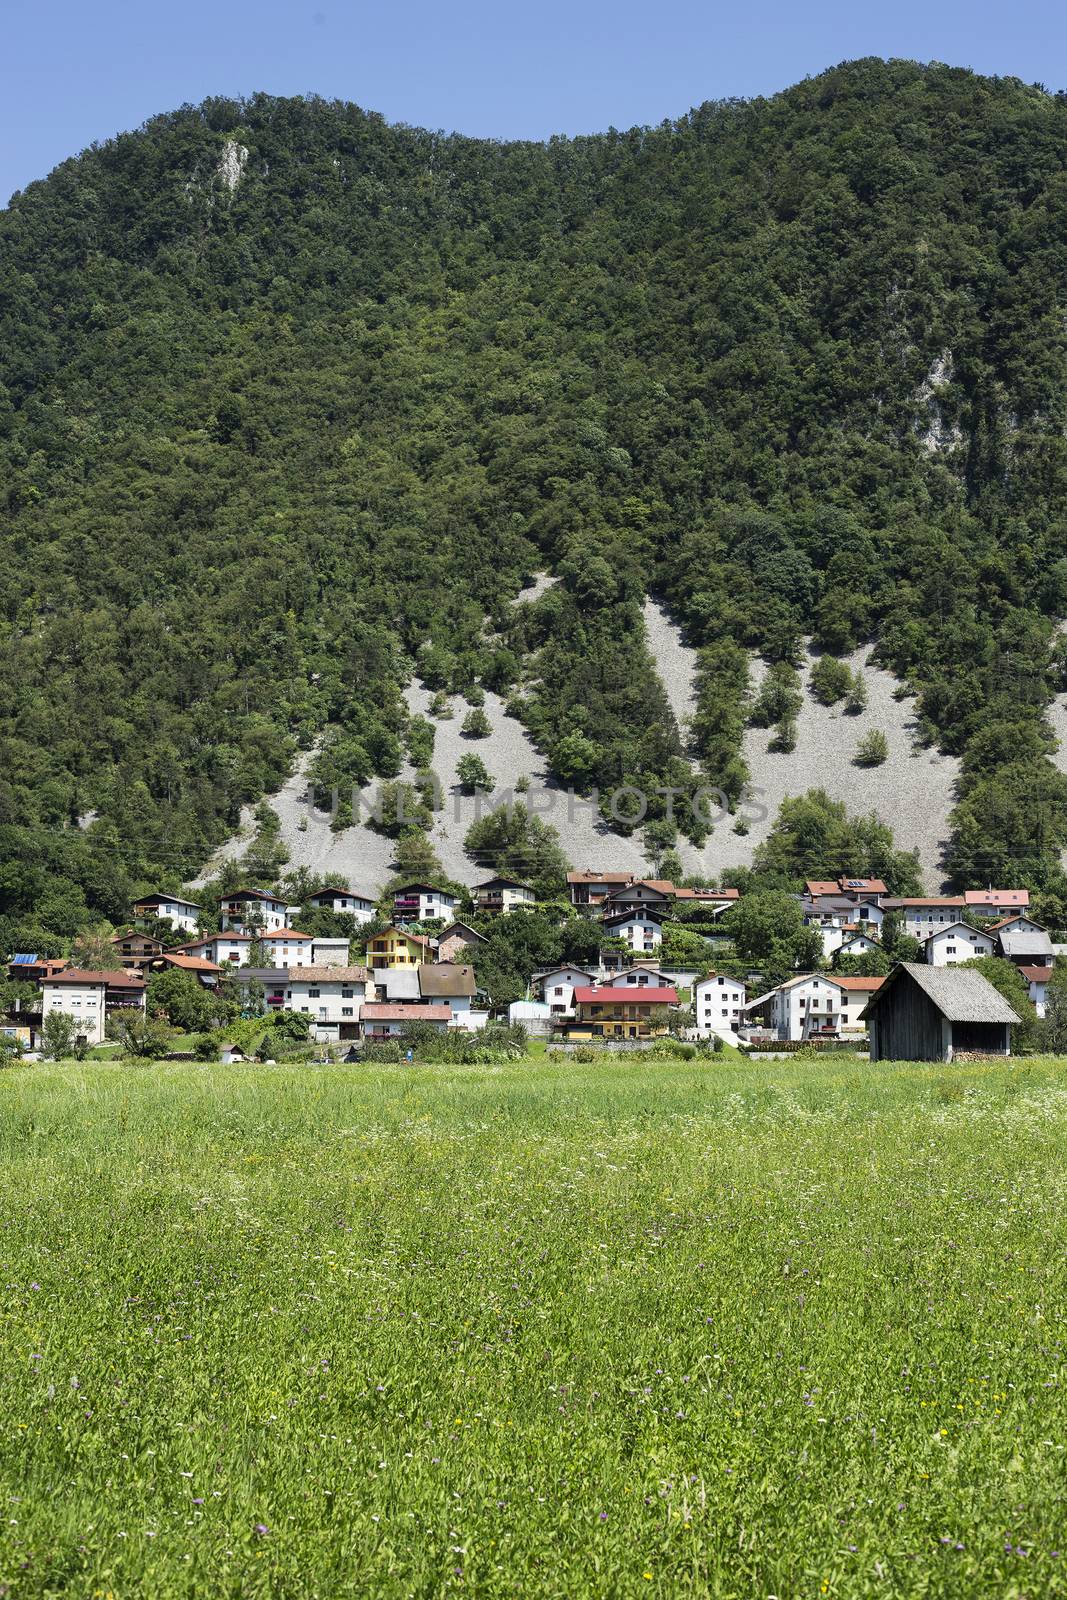 Village below the hill  by photosampler